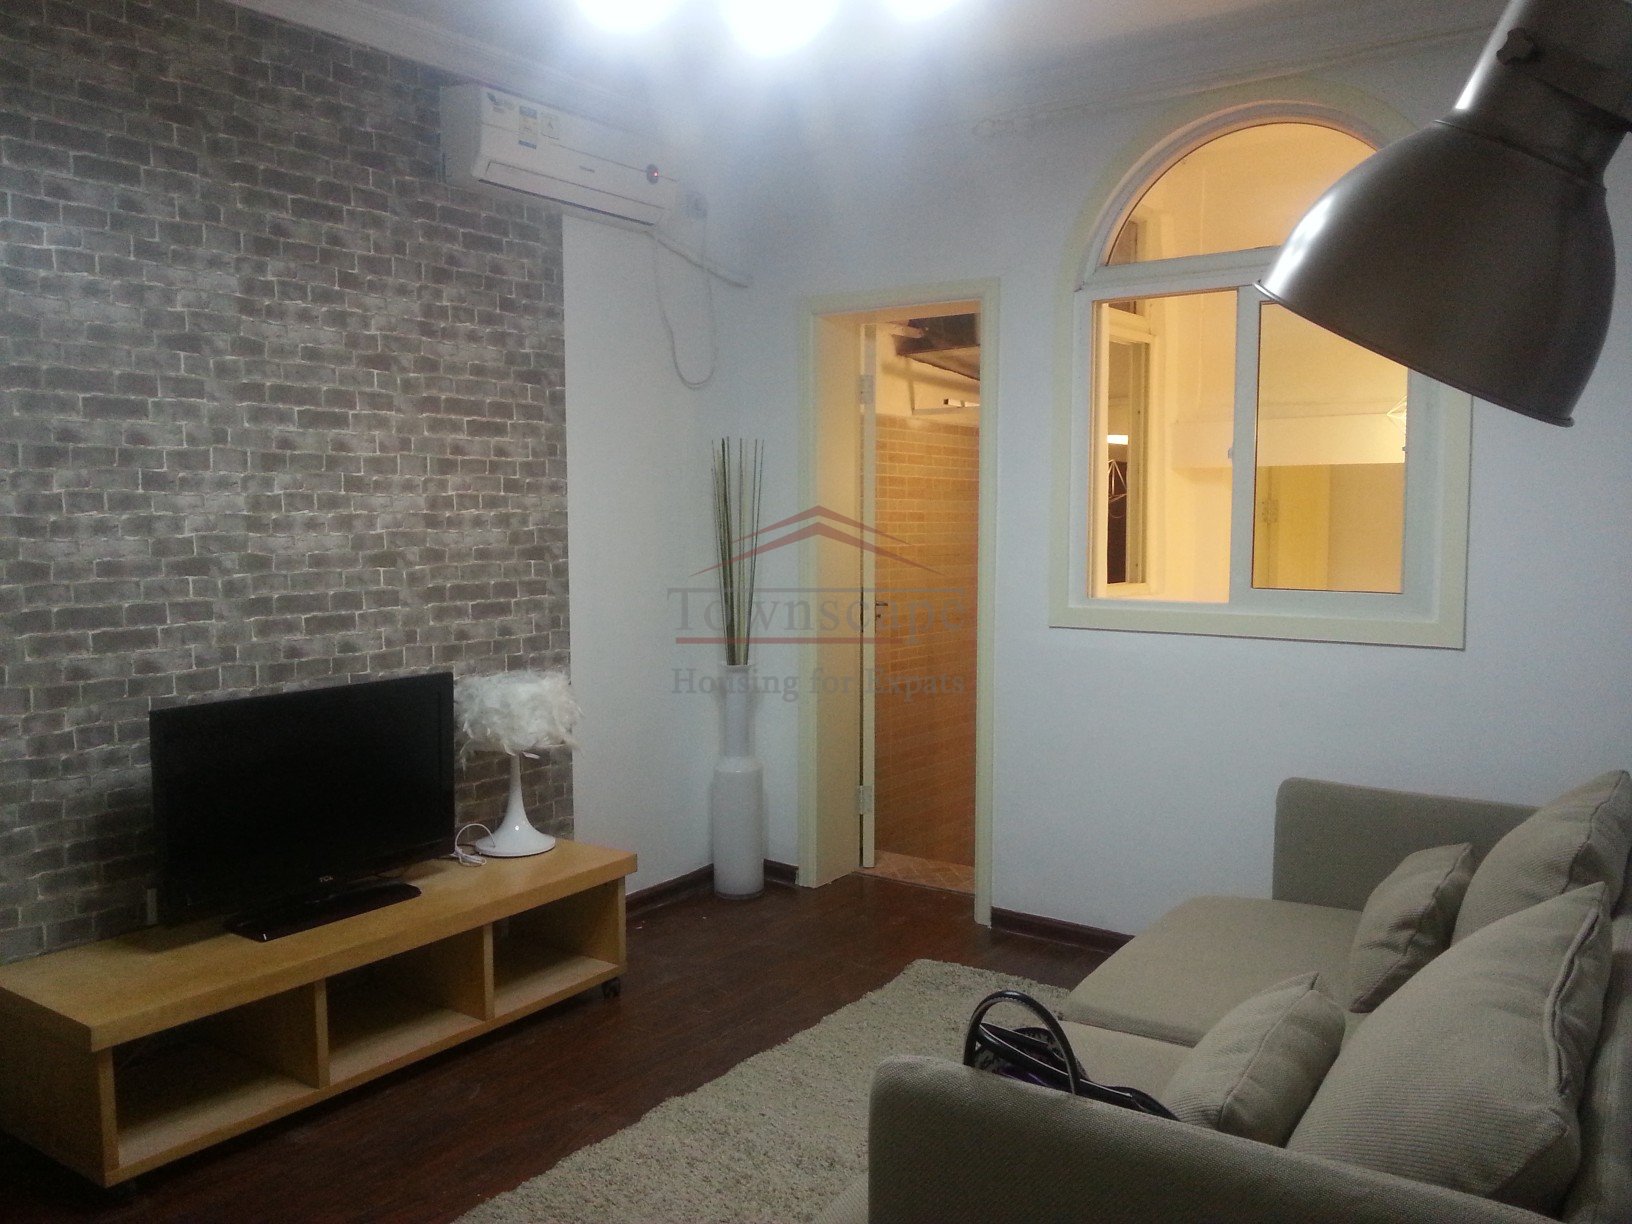 rent house in shanghai 1 Bedroom Lane House Apartment in great area line 1/10 Shanxi road